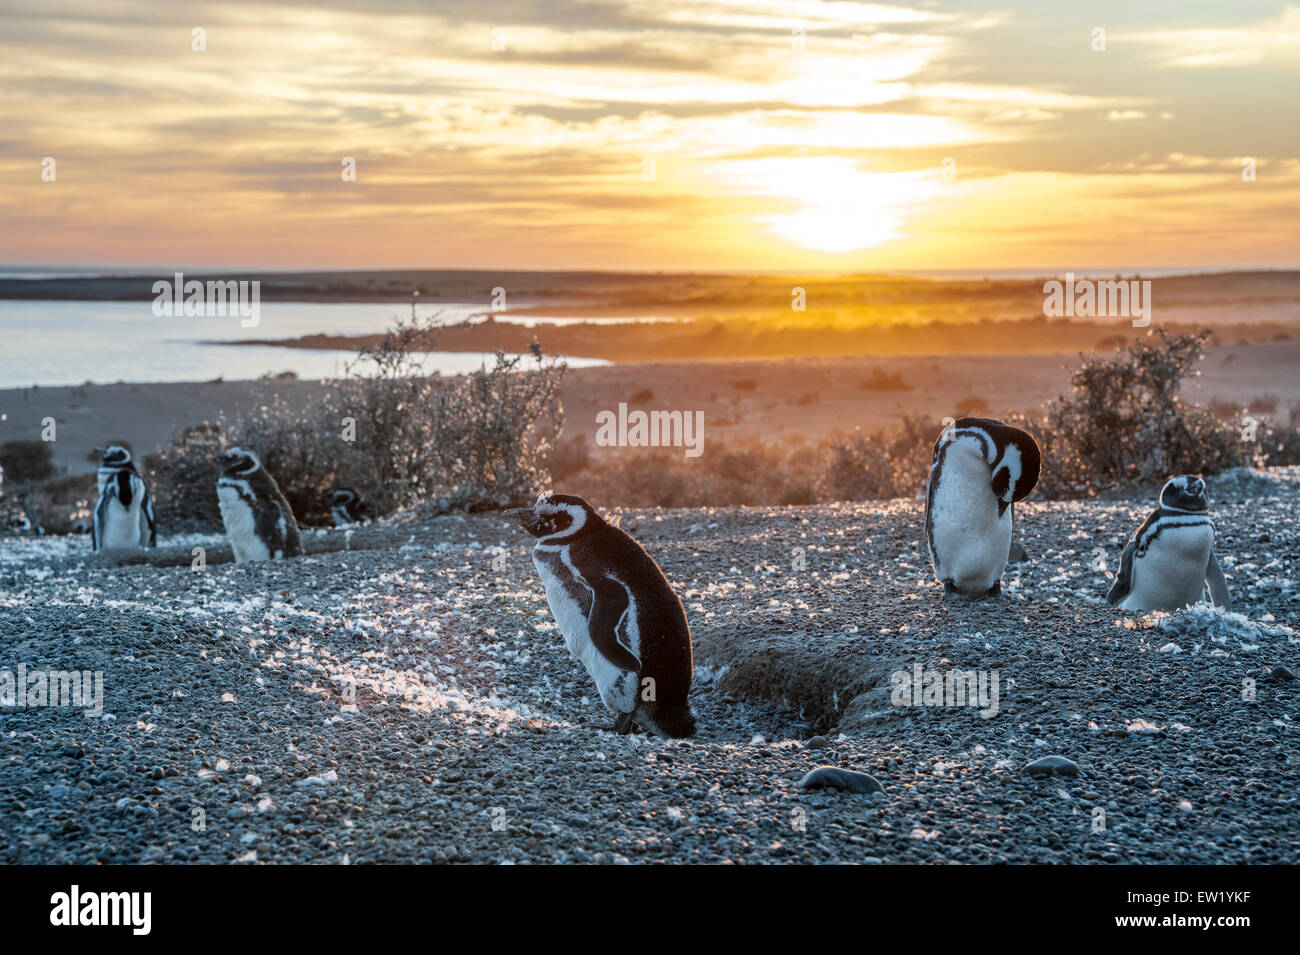 Magellanic Penguins, very early golden morning at Natural protected area Punta Tombo, Chubut, Patagonia, Argentina Stock Photo